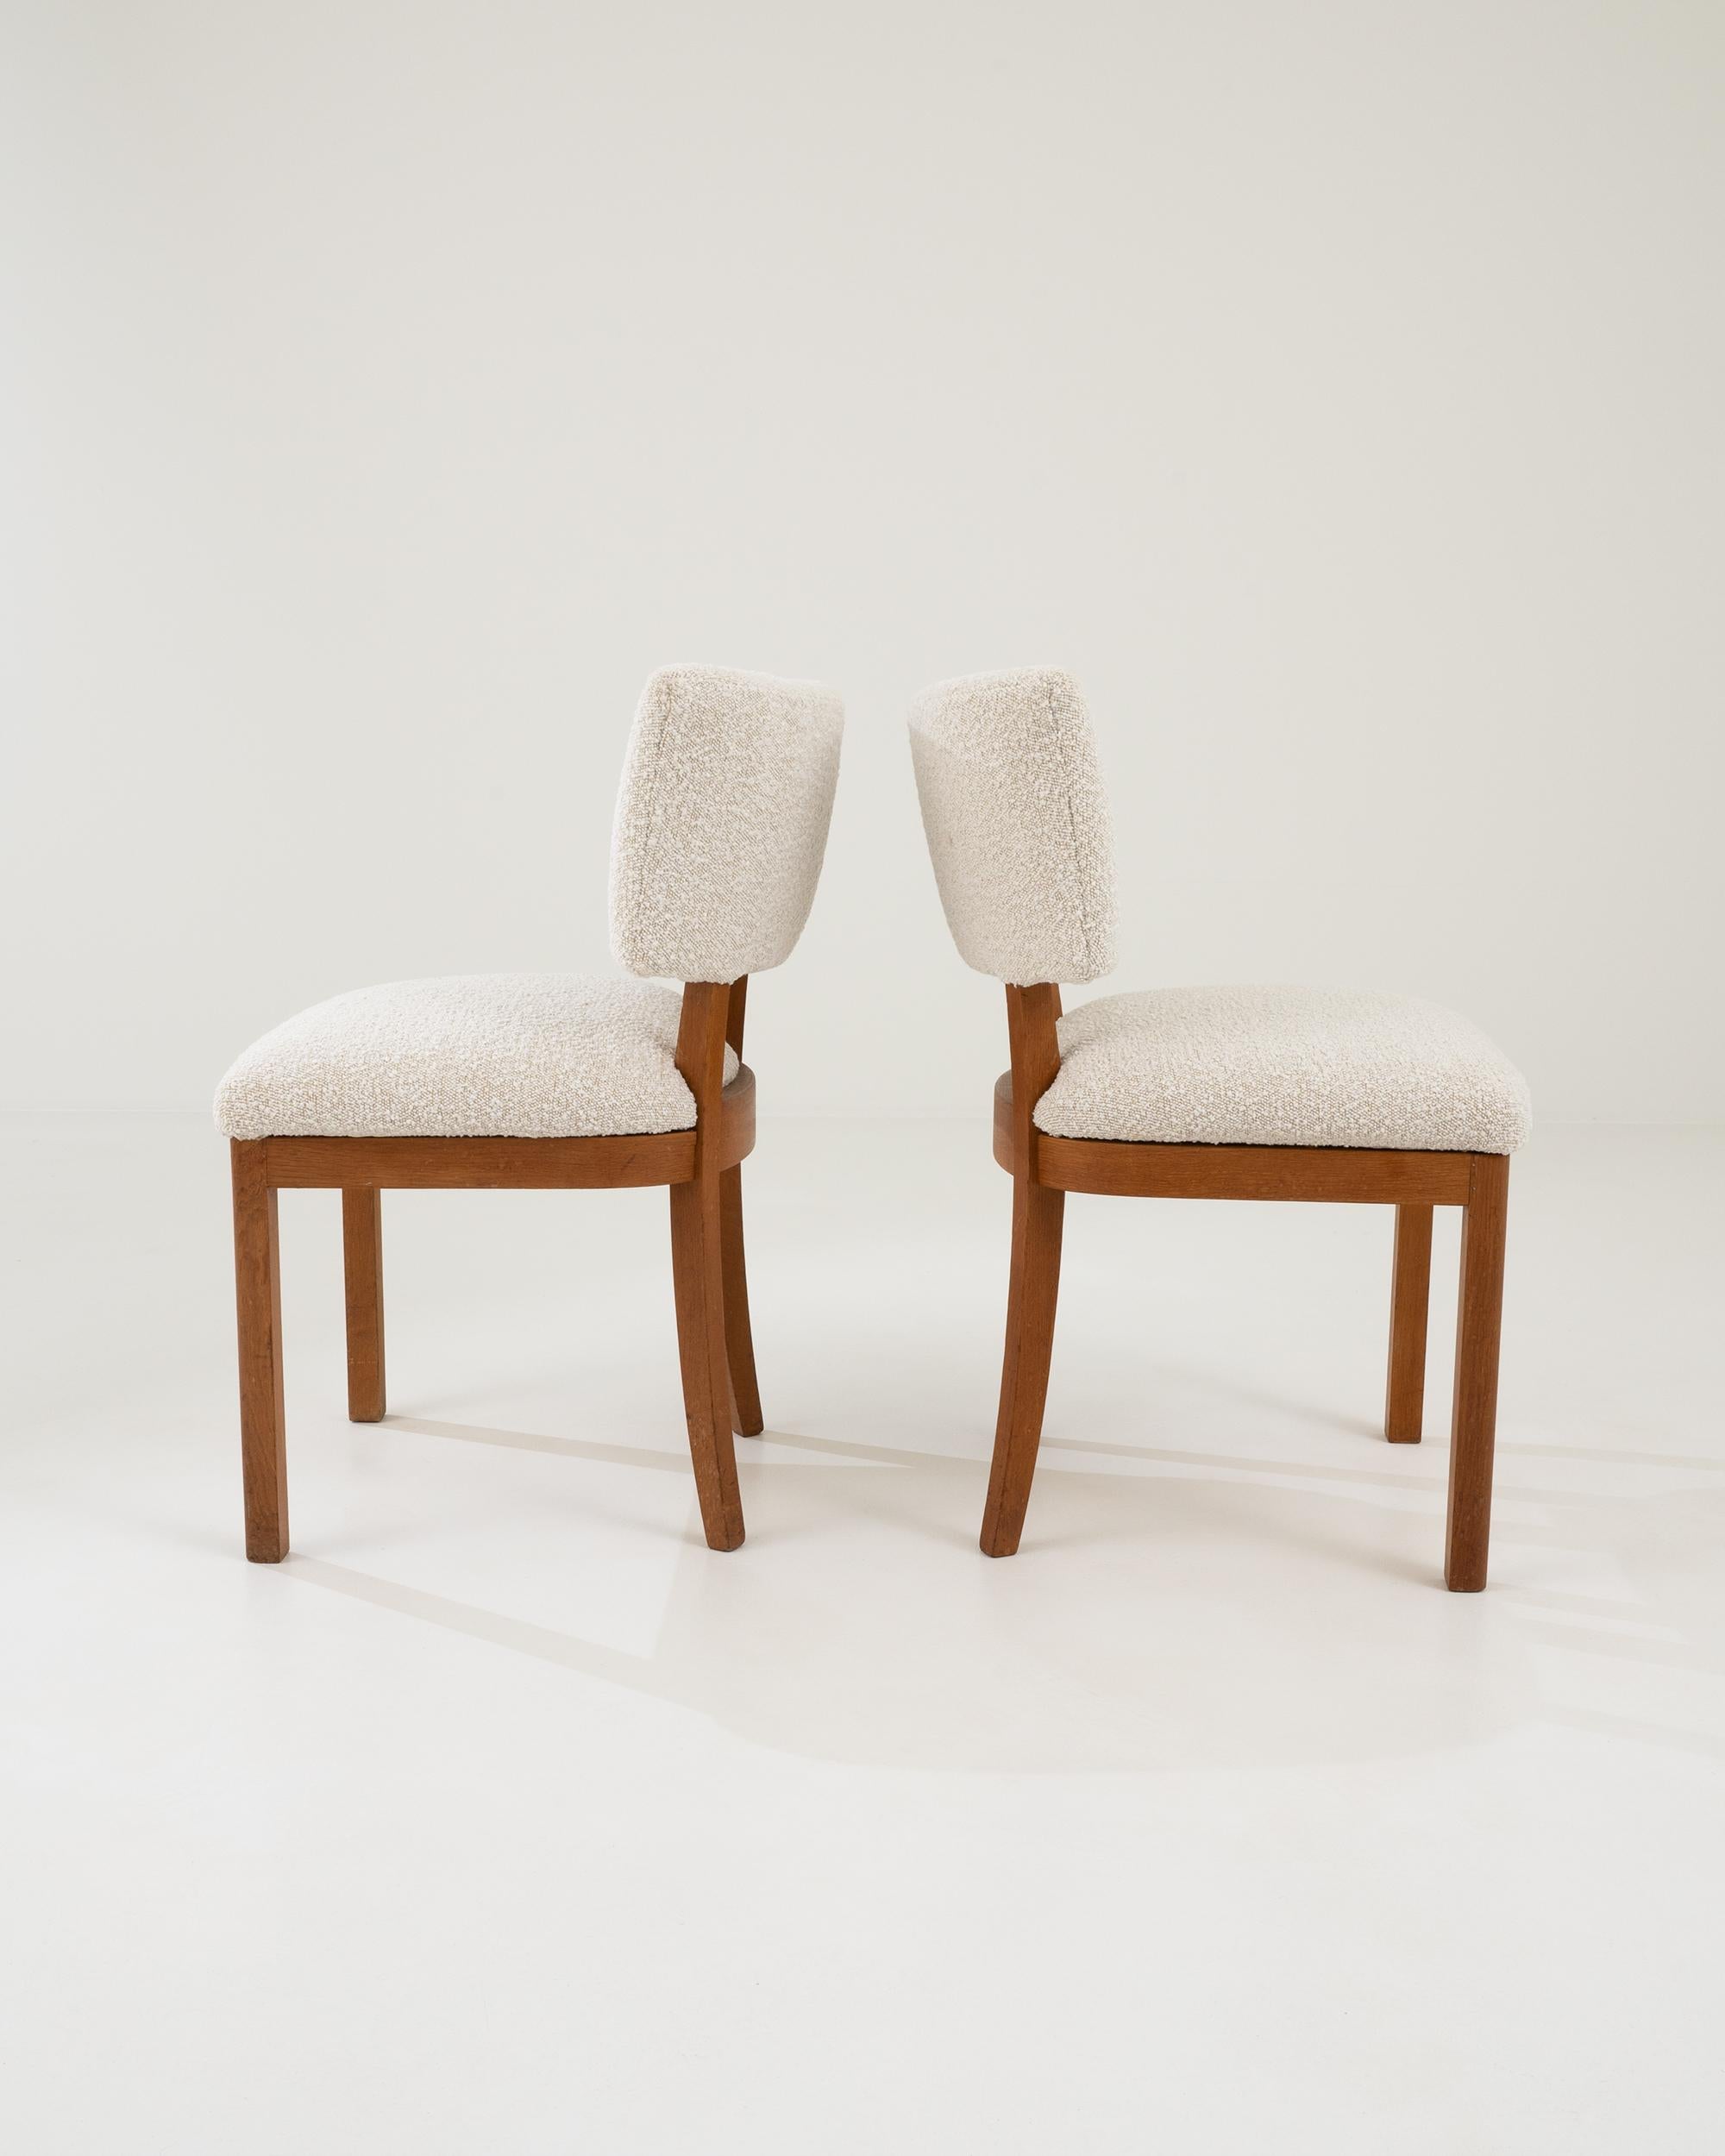 20th Century Czech Upholstered Dining Chairs, a Pair For Sale 1